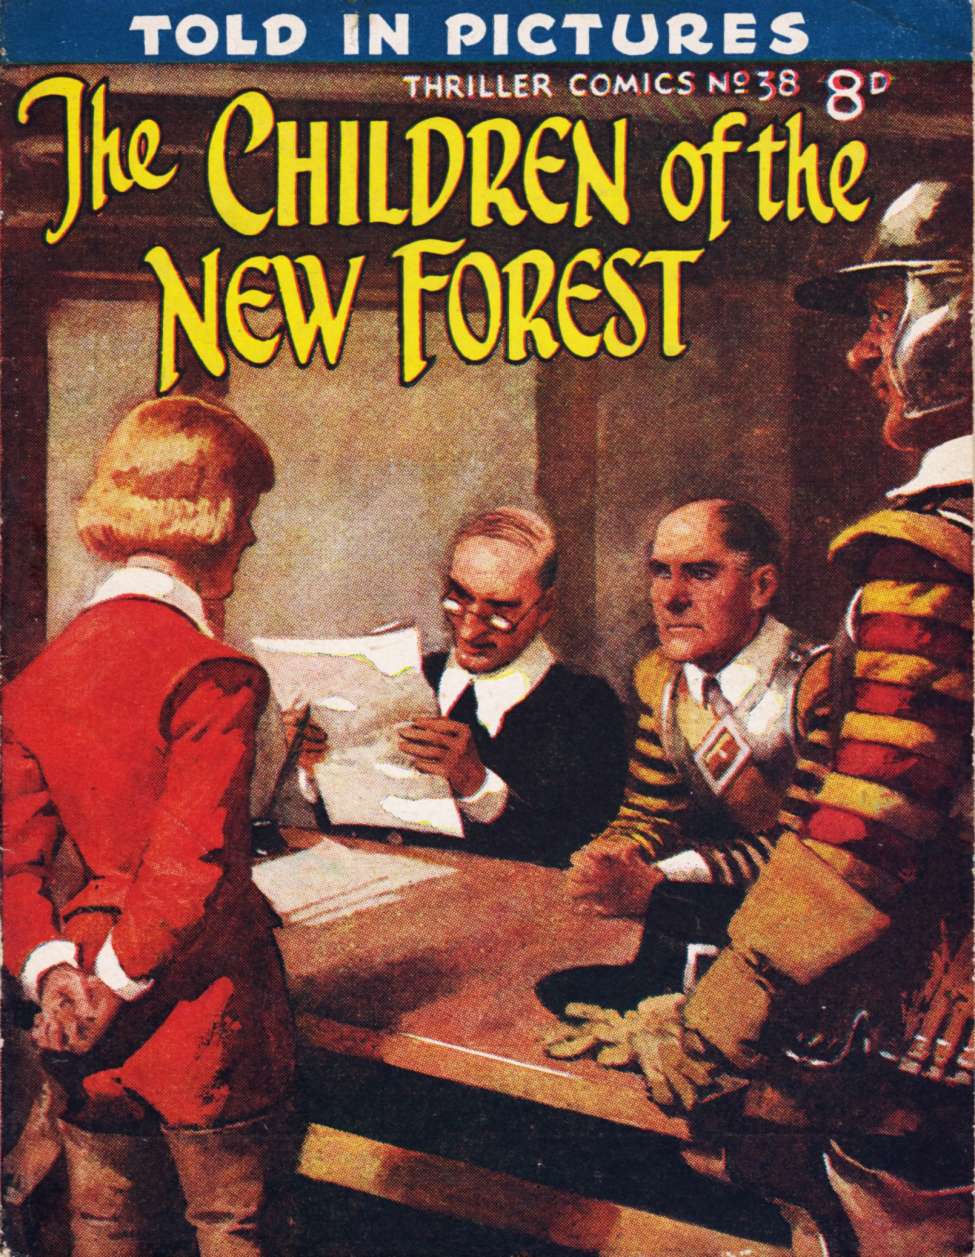 Book Cover For Thriller Comics 38 - Children of the New Forest